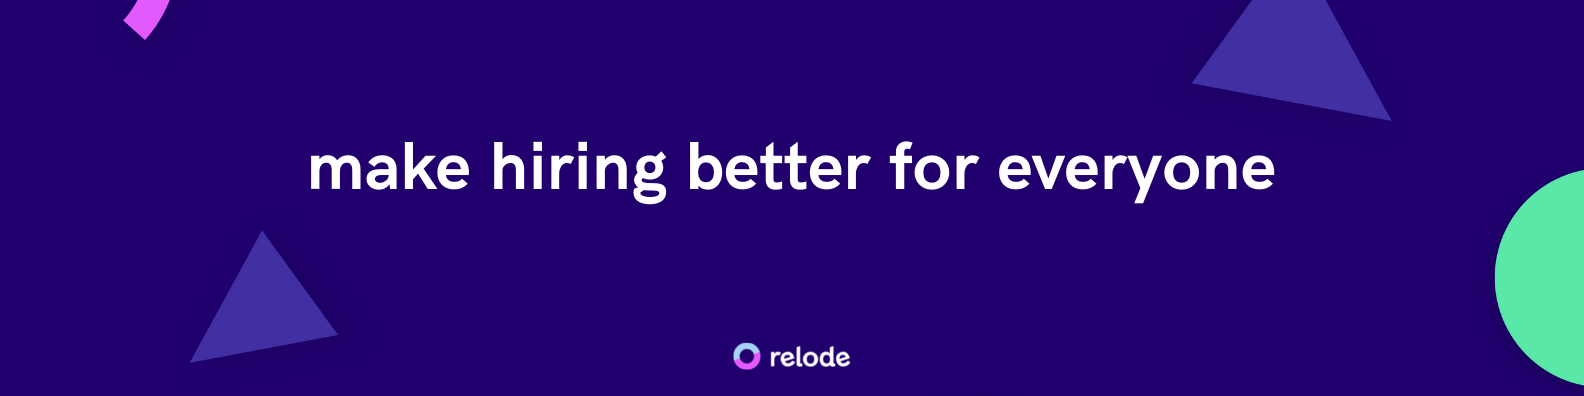 Make hiring better for everyone with Relode